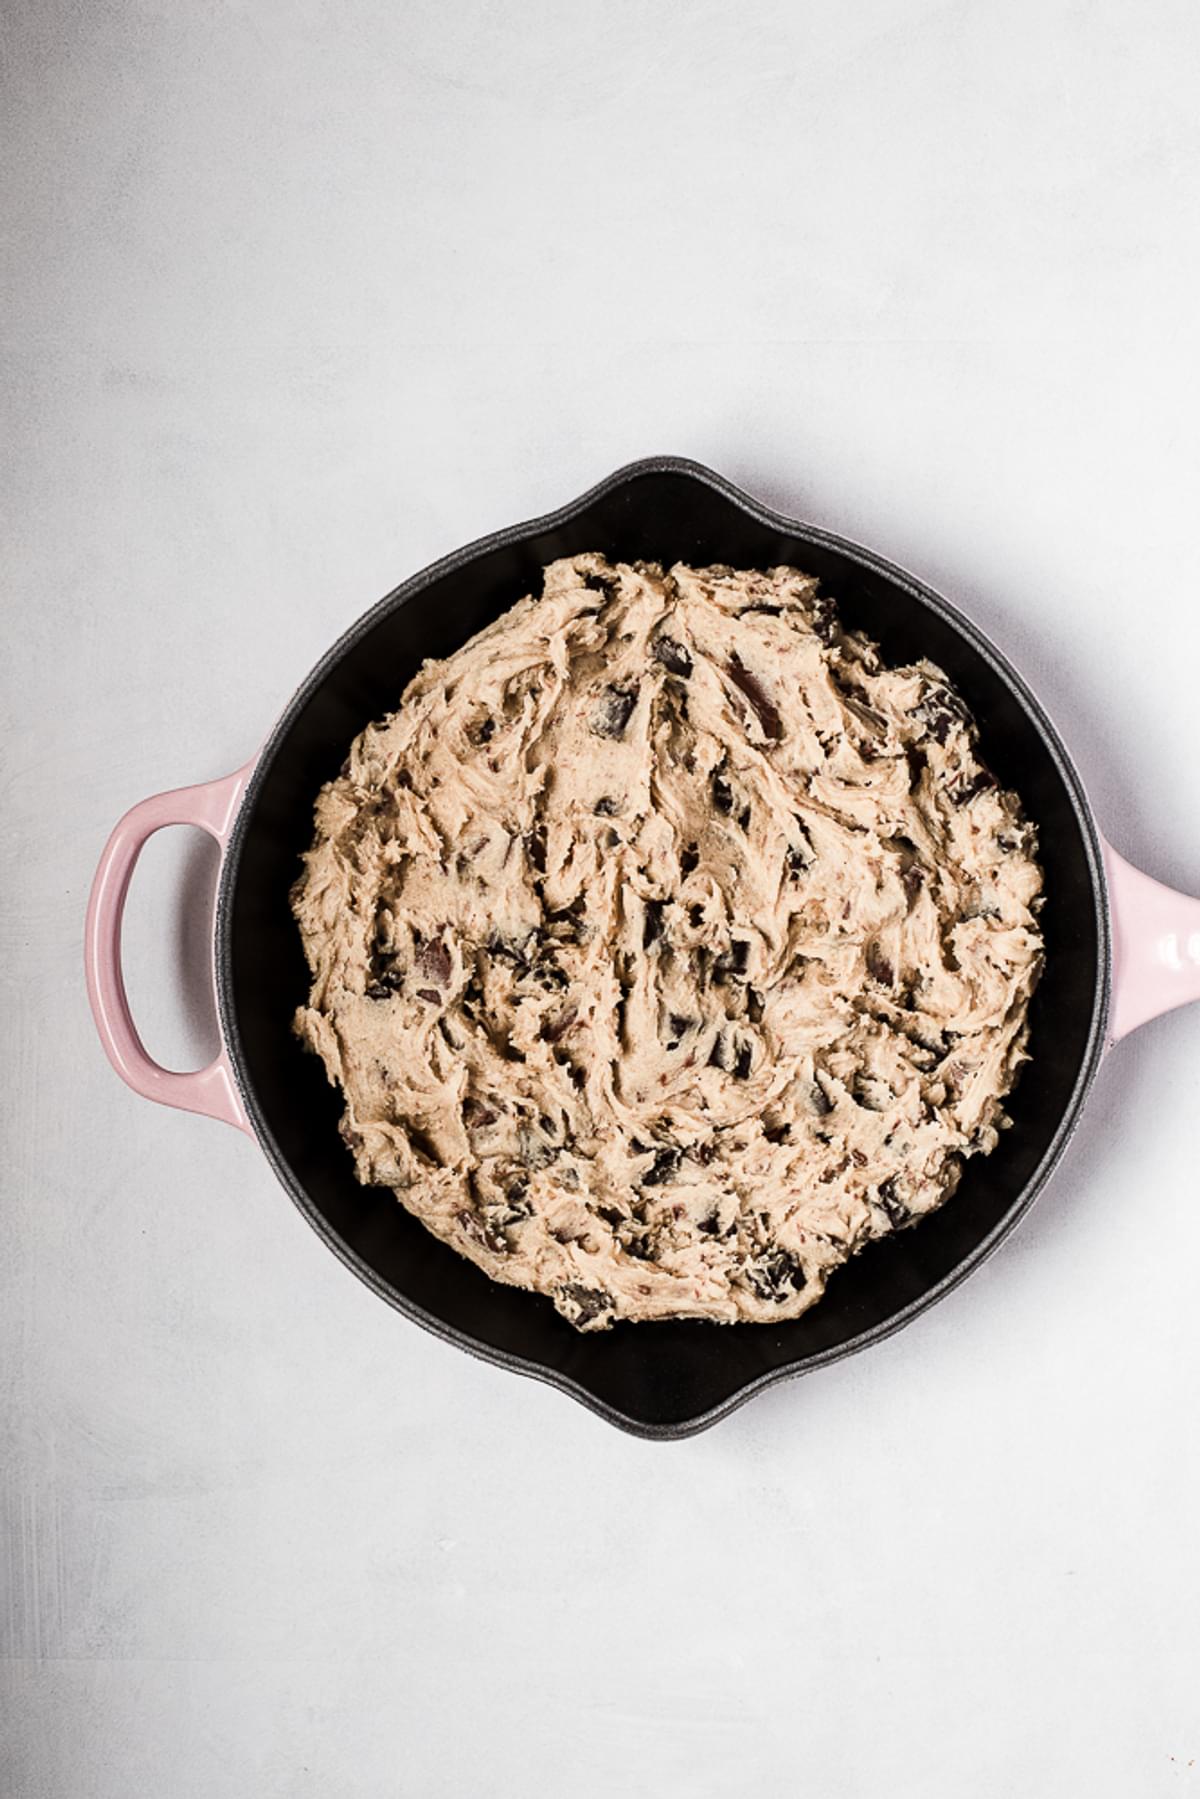 Chocolate chip Cookie dough in a cast iron skillet